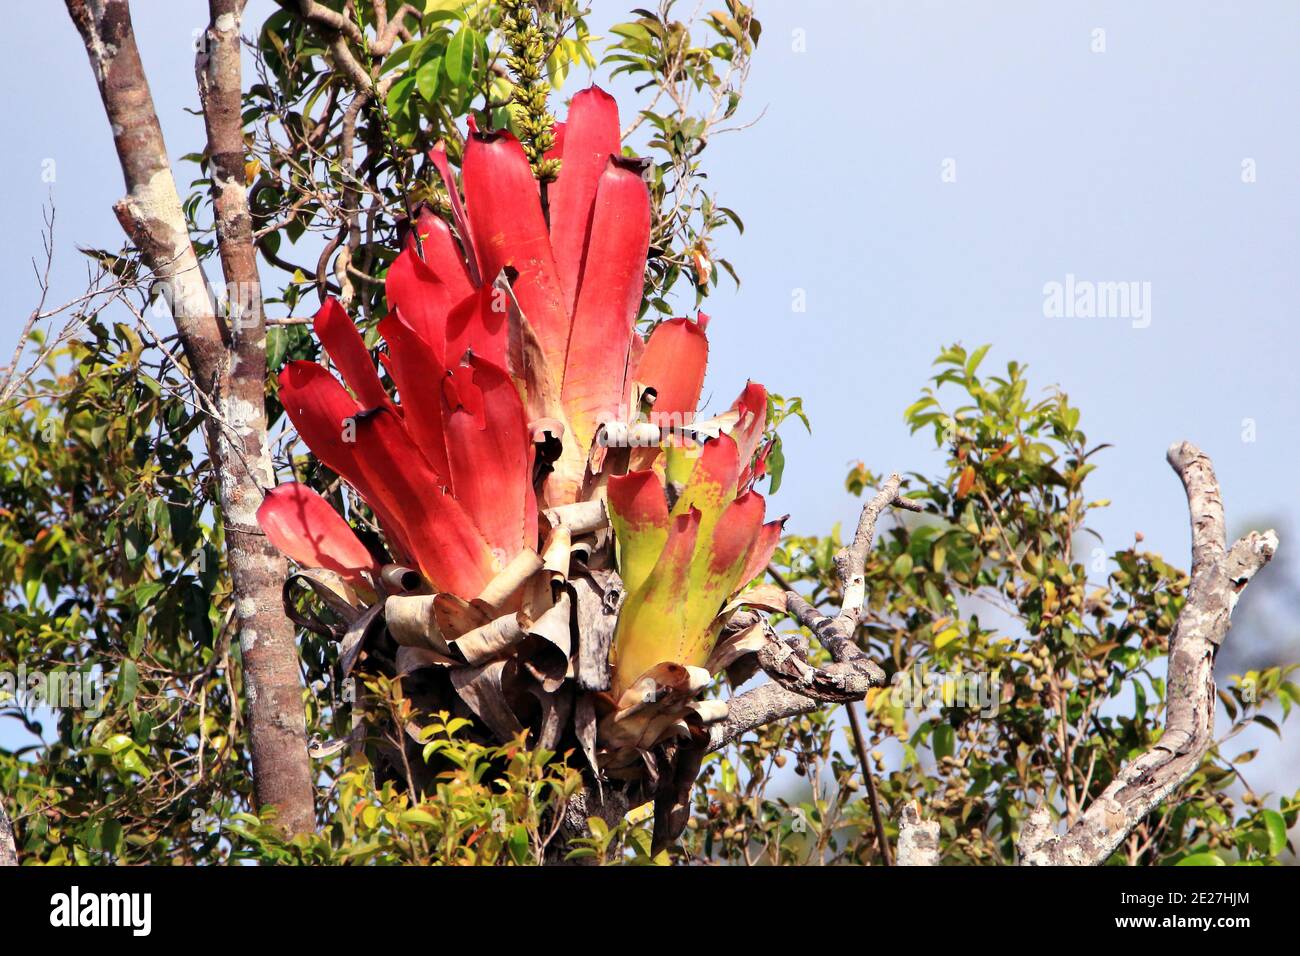 Large red bromeliad located on top of a tall tree. Stock Photo